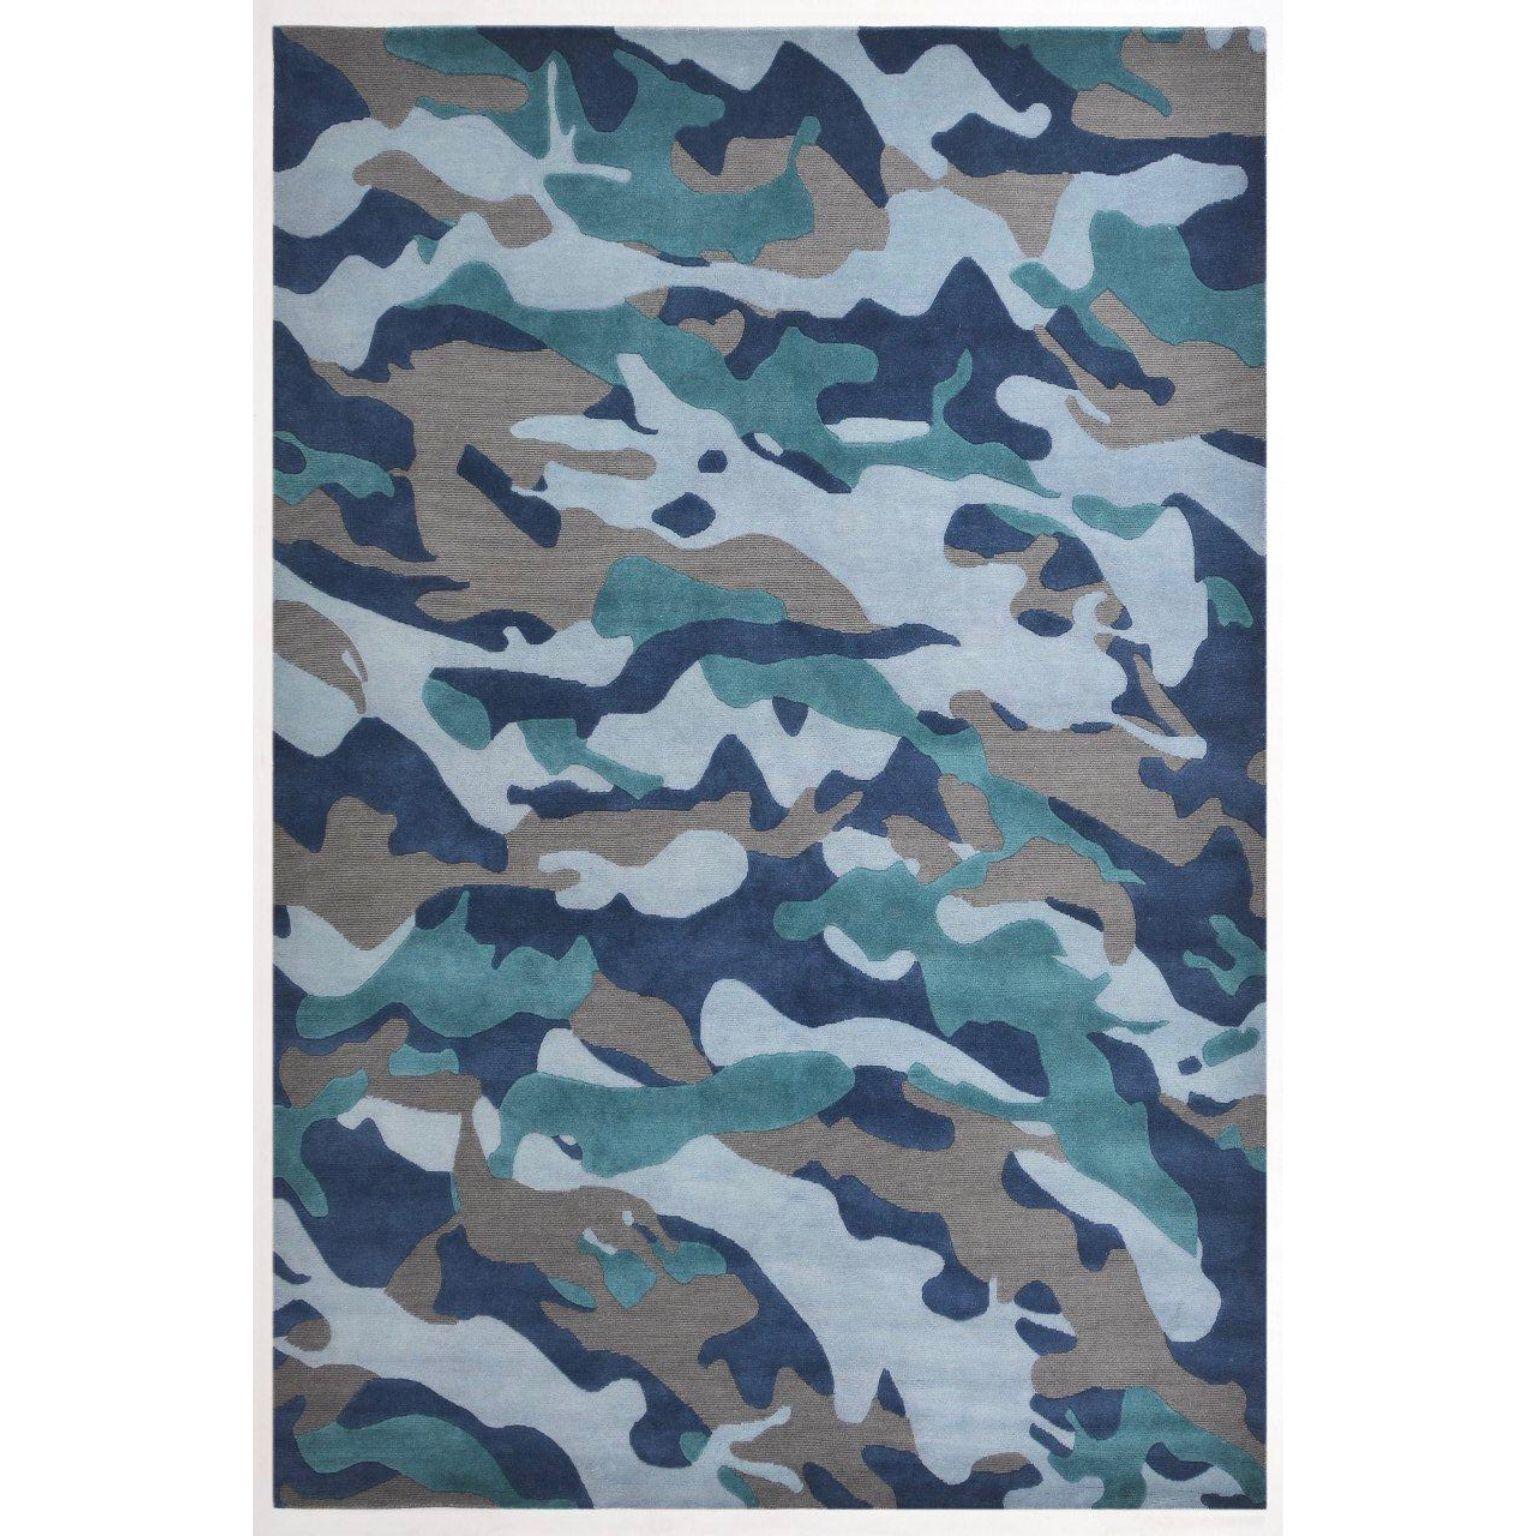 Camo small rug by Art & Loom
Dimensions: D 243.4 x H 304.8 cm
Materials: 100% New Zealand wool
Quality (Knots per Inch): 60
Also available in different dimensions.

Samantha Gallacher has always had a keen eye for aesthetics, drawing